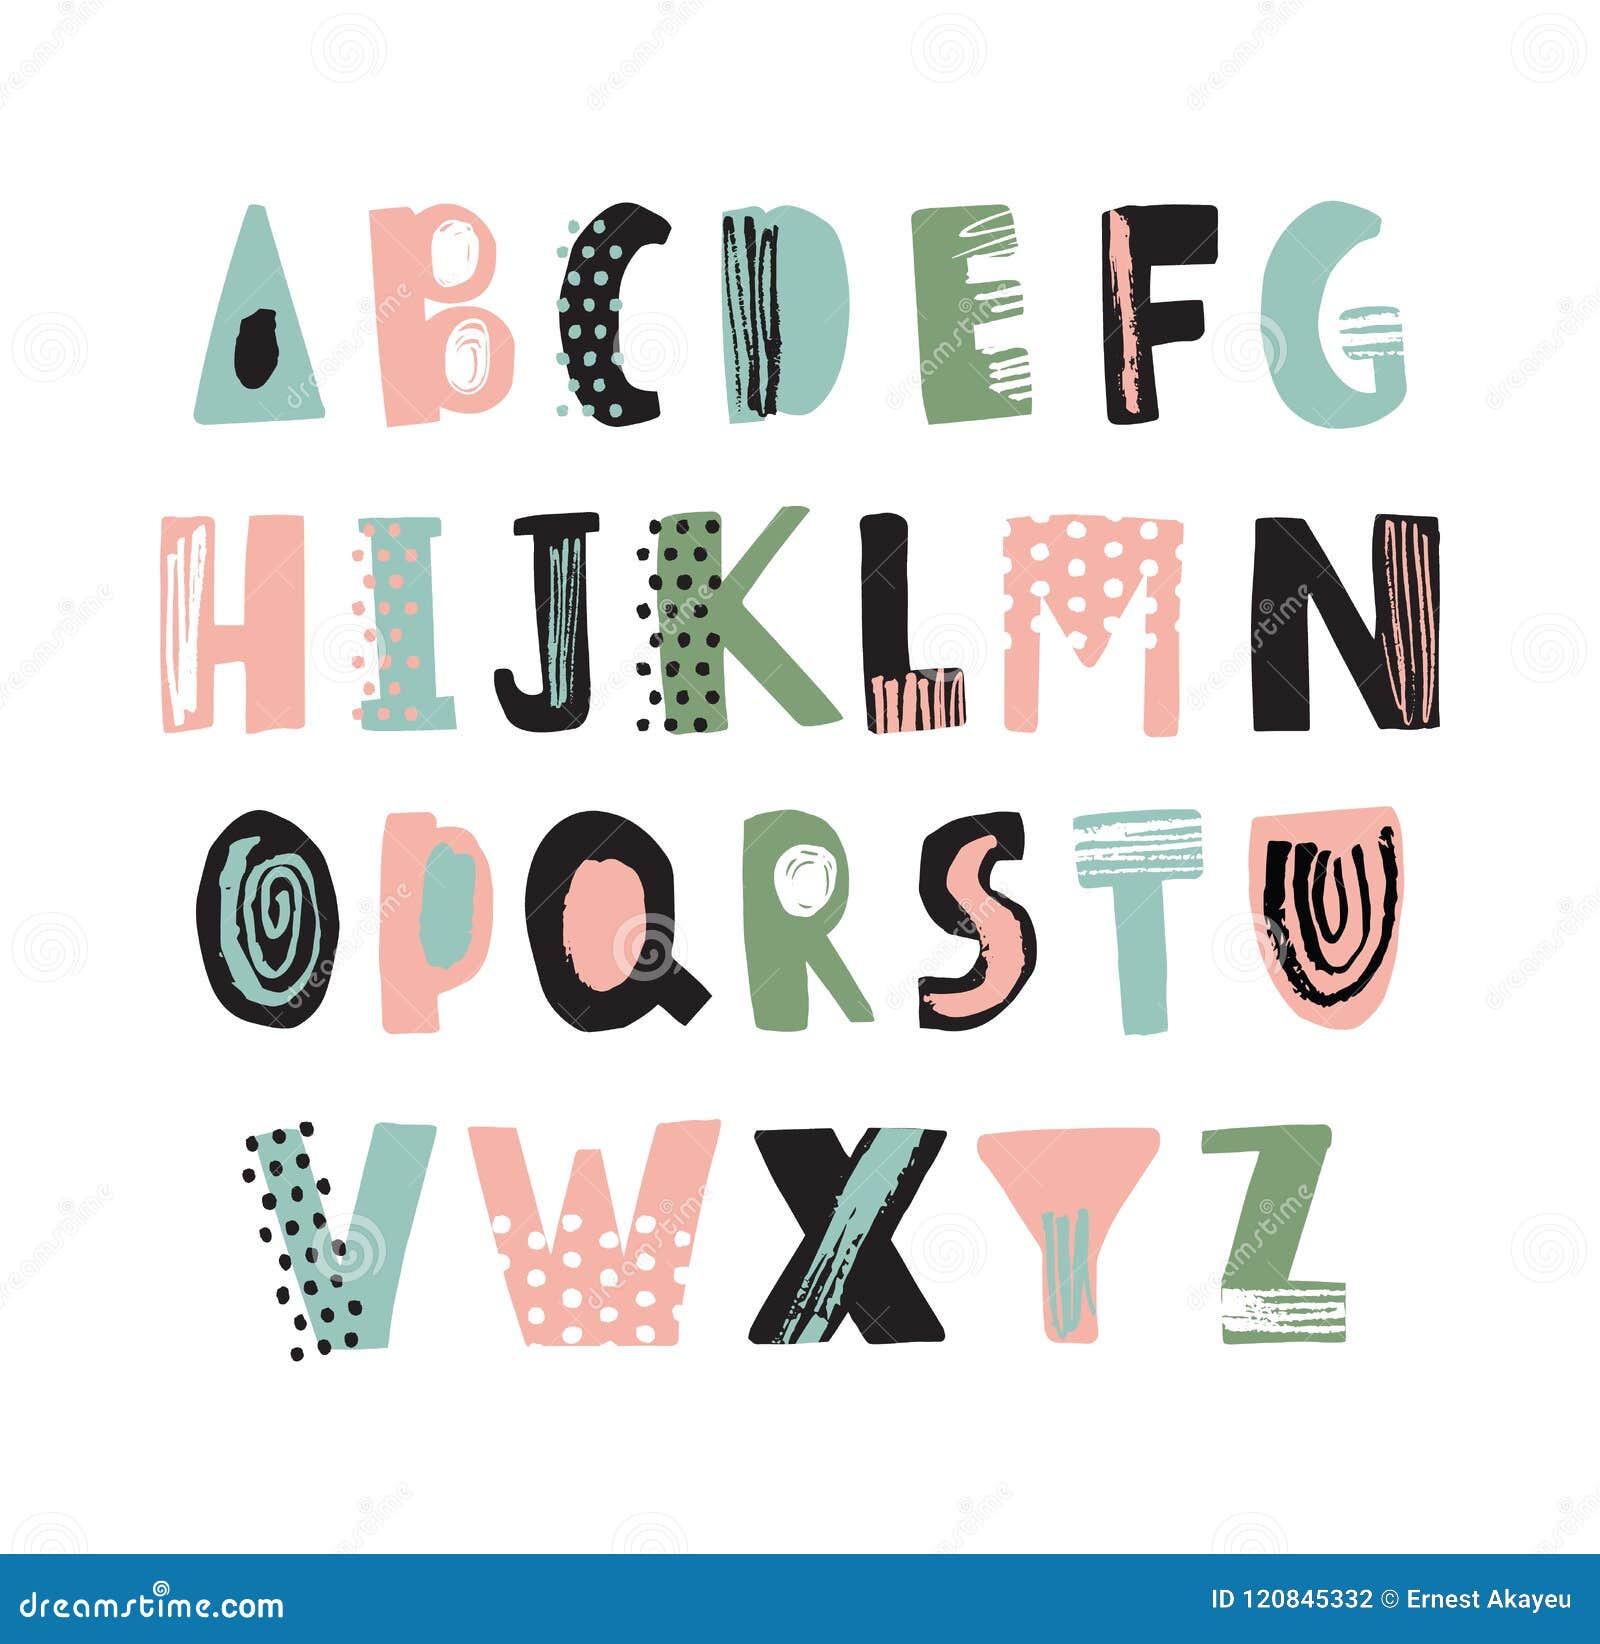 funky latin font or childish english alphabet hand drawn on white background. colorful textured letters decorated with